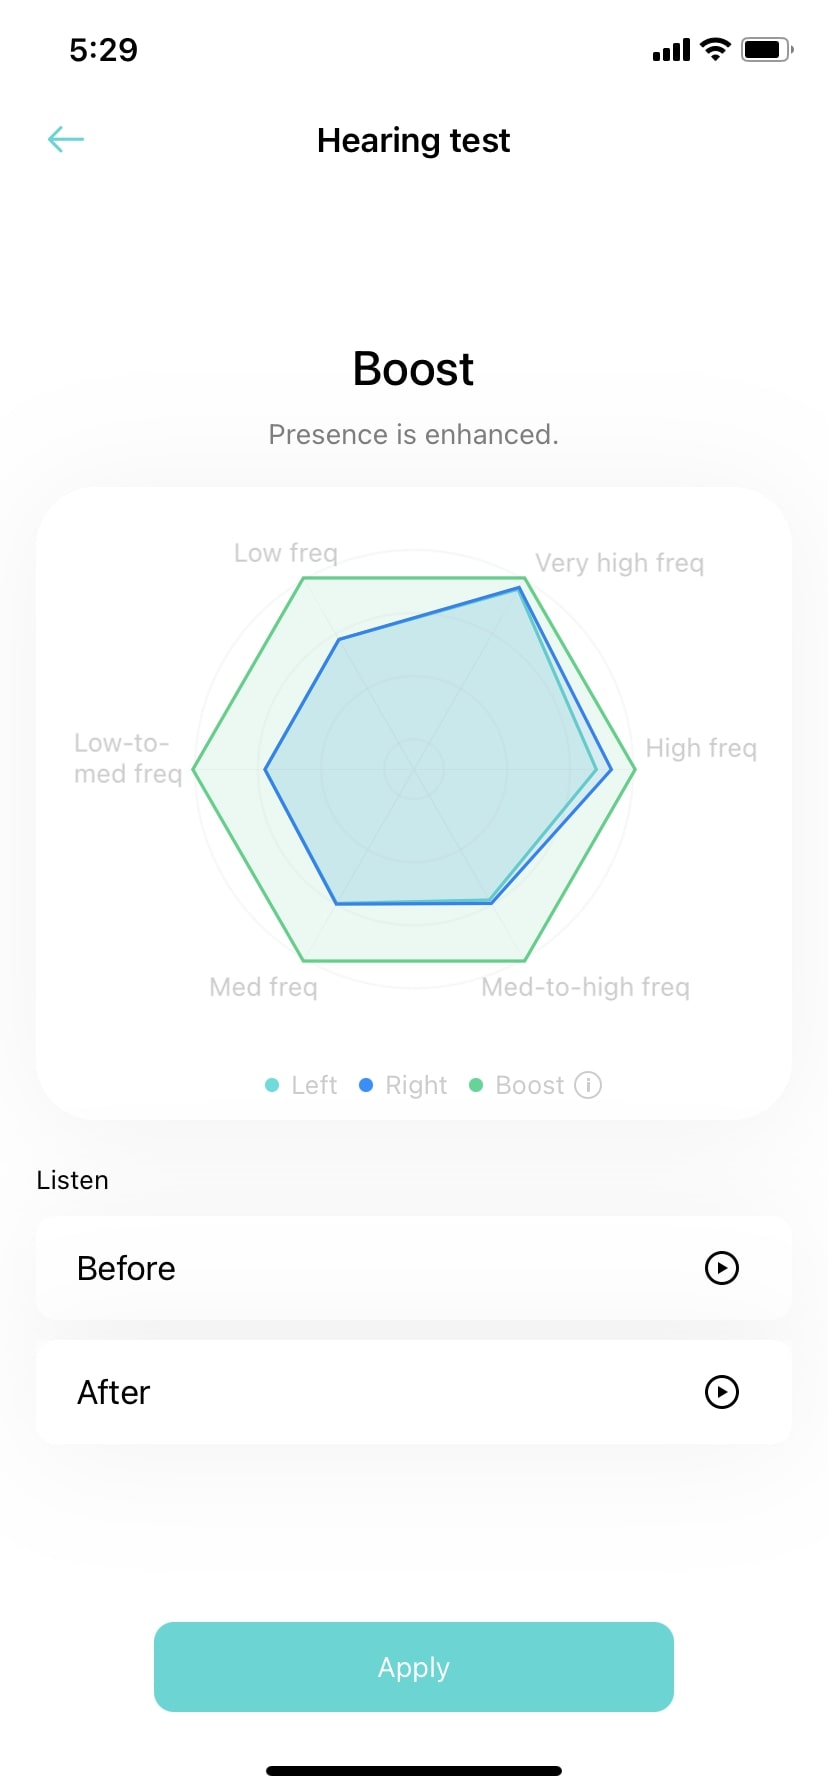 OnePlus Buds Pro hearing test results displayed in chart.